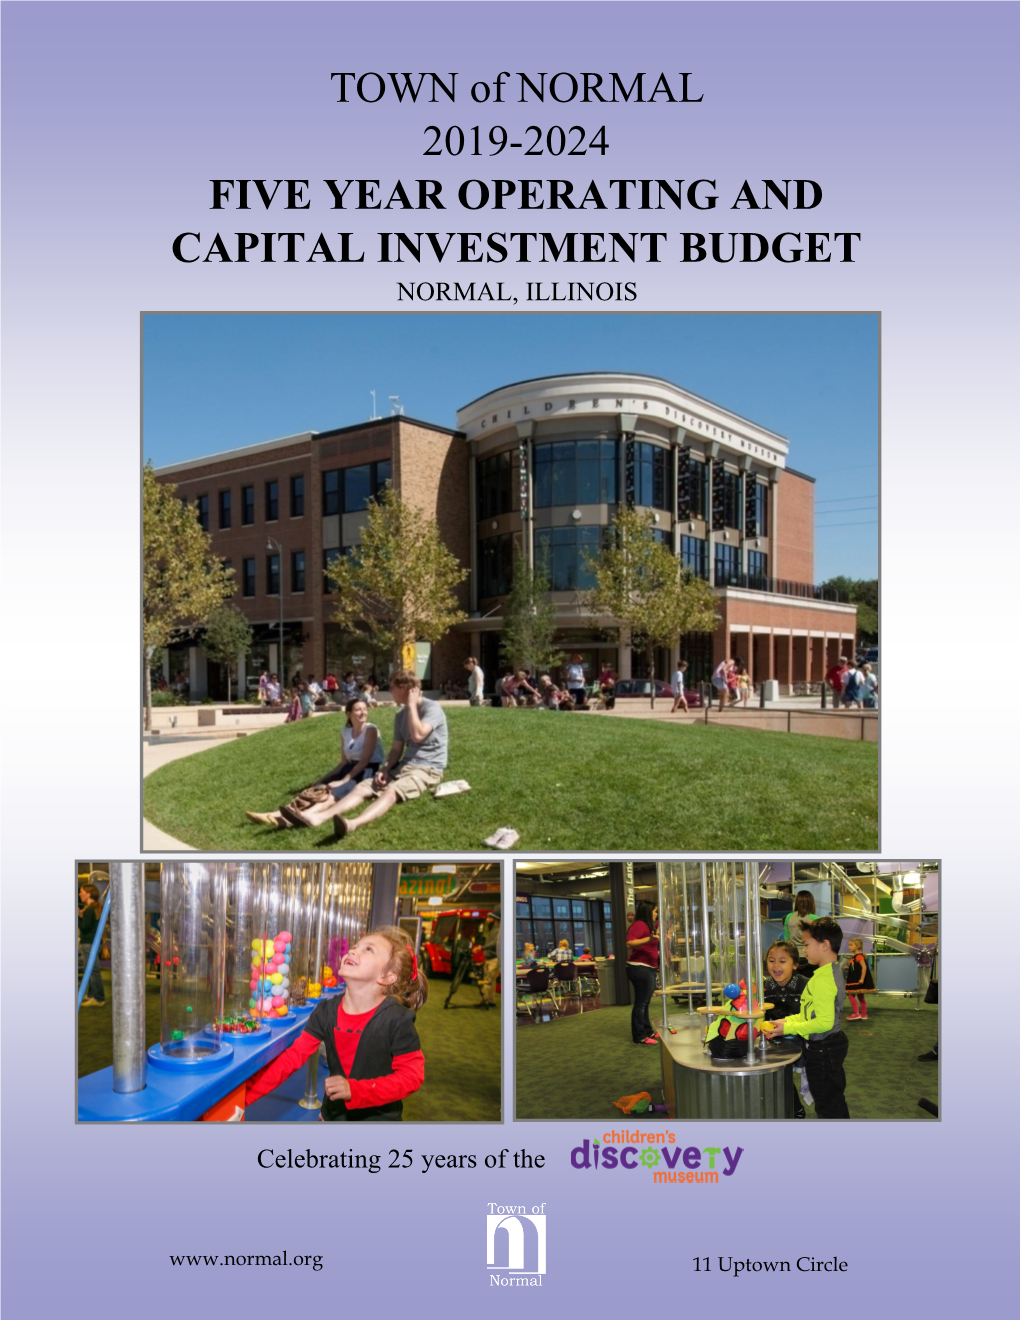 TOWN of NORMAL 2019-2024 FIVE YEAR OPERATING and CAPITAL INVESTMENT BUDGET NORMAL, ILLINOIS